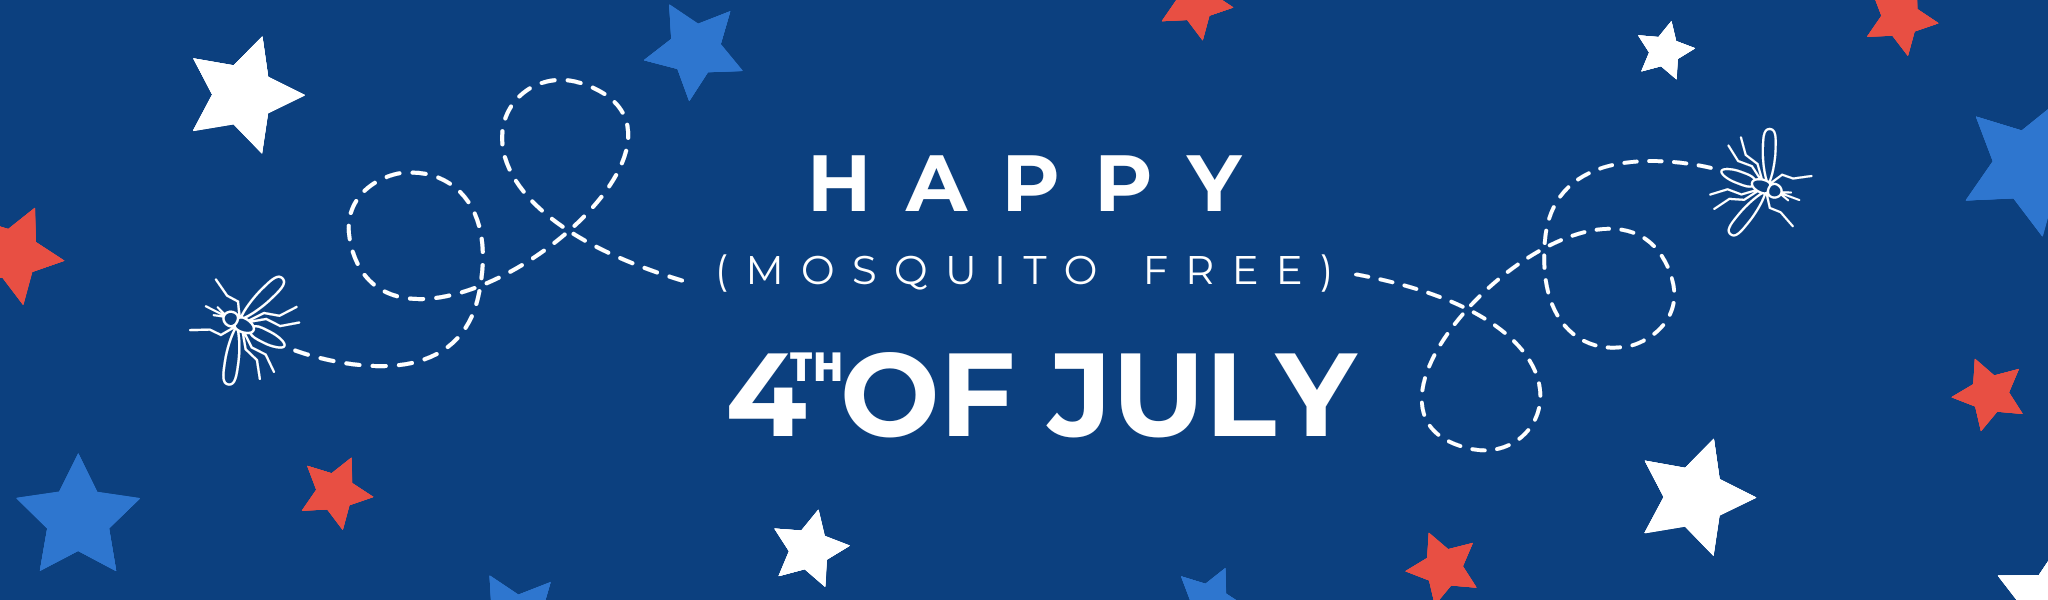 Celebrate the 4th of July Weekend with Natural Mosquito Repellent Protection!